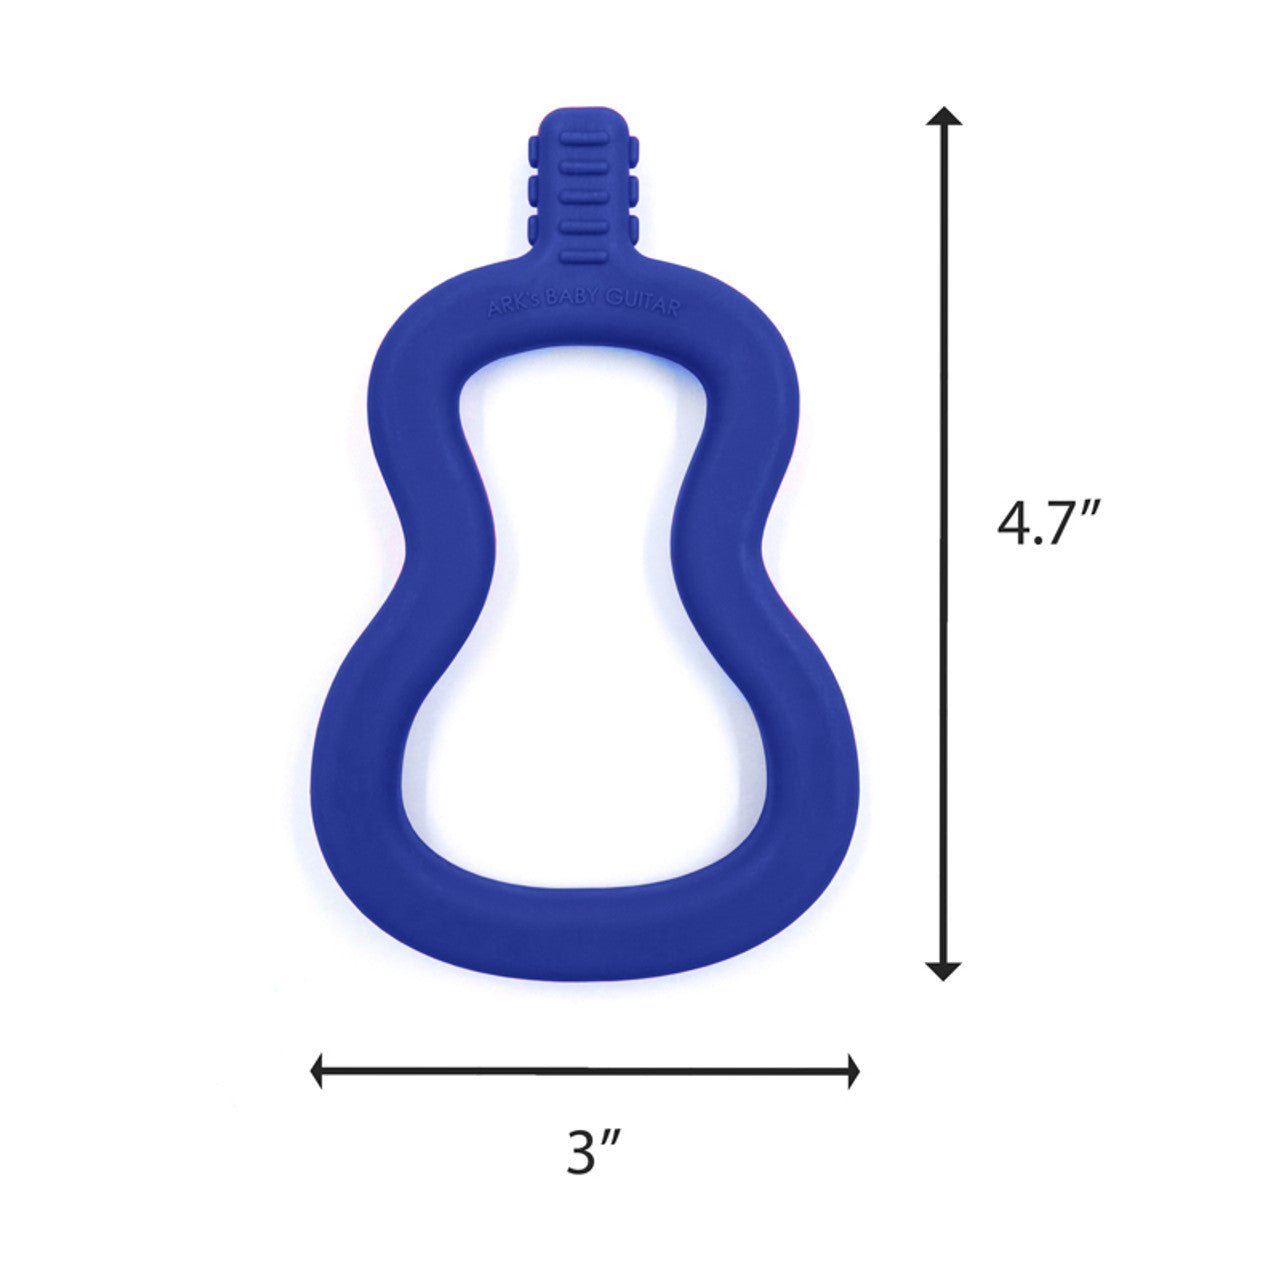 An infographic depicting the dimensions of the Baby Guitar Chew.